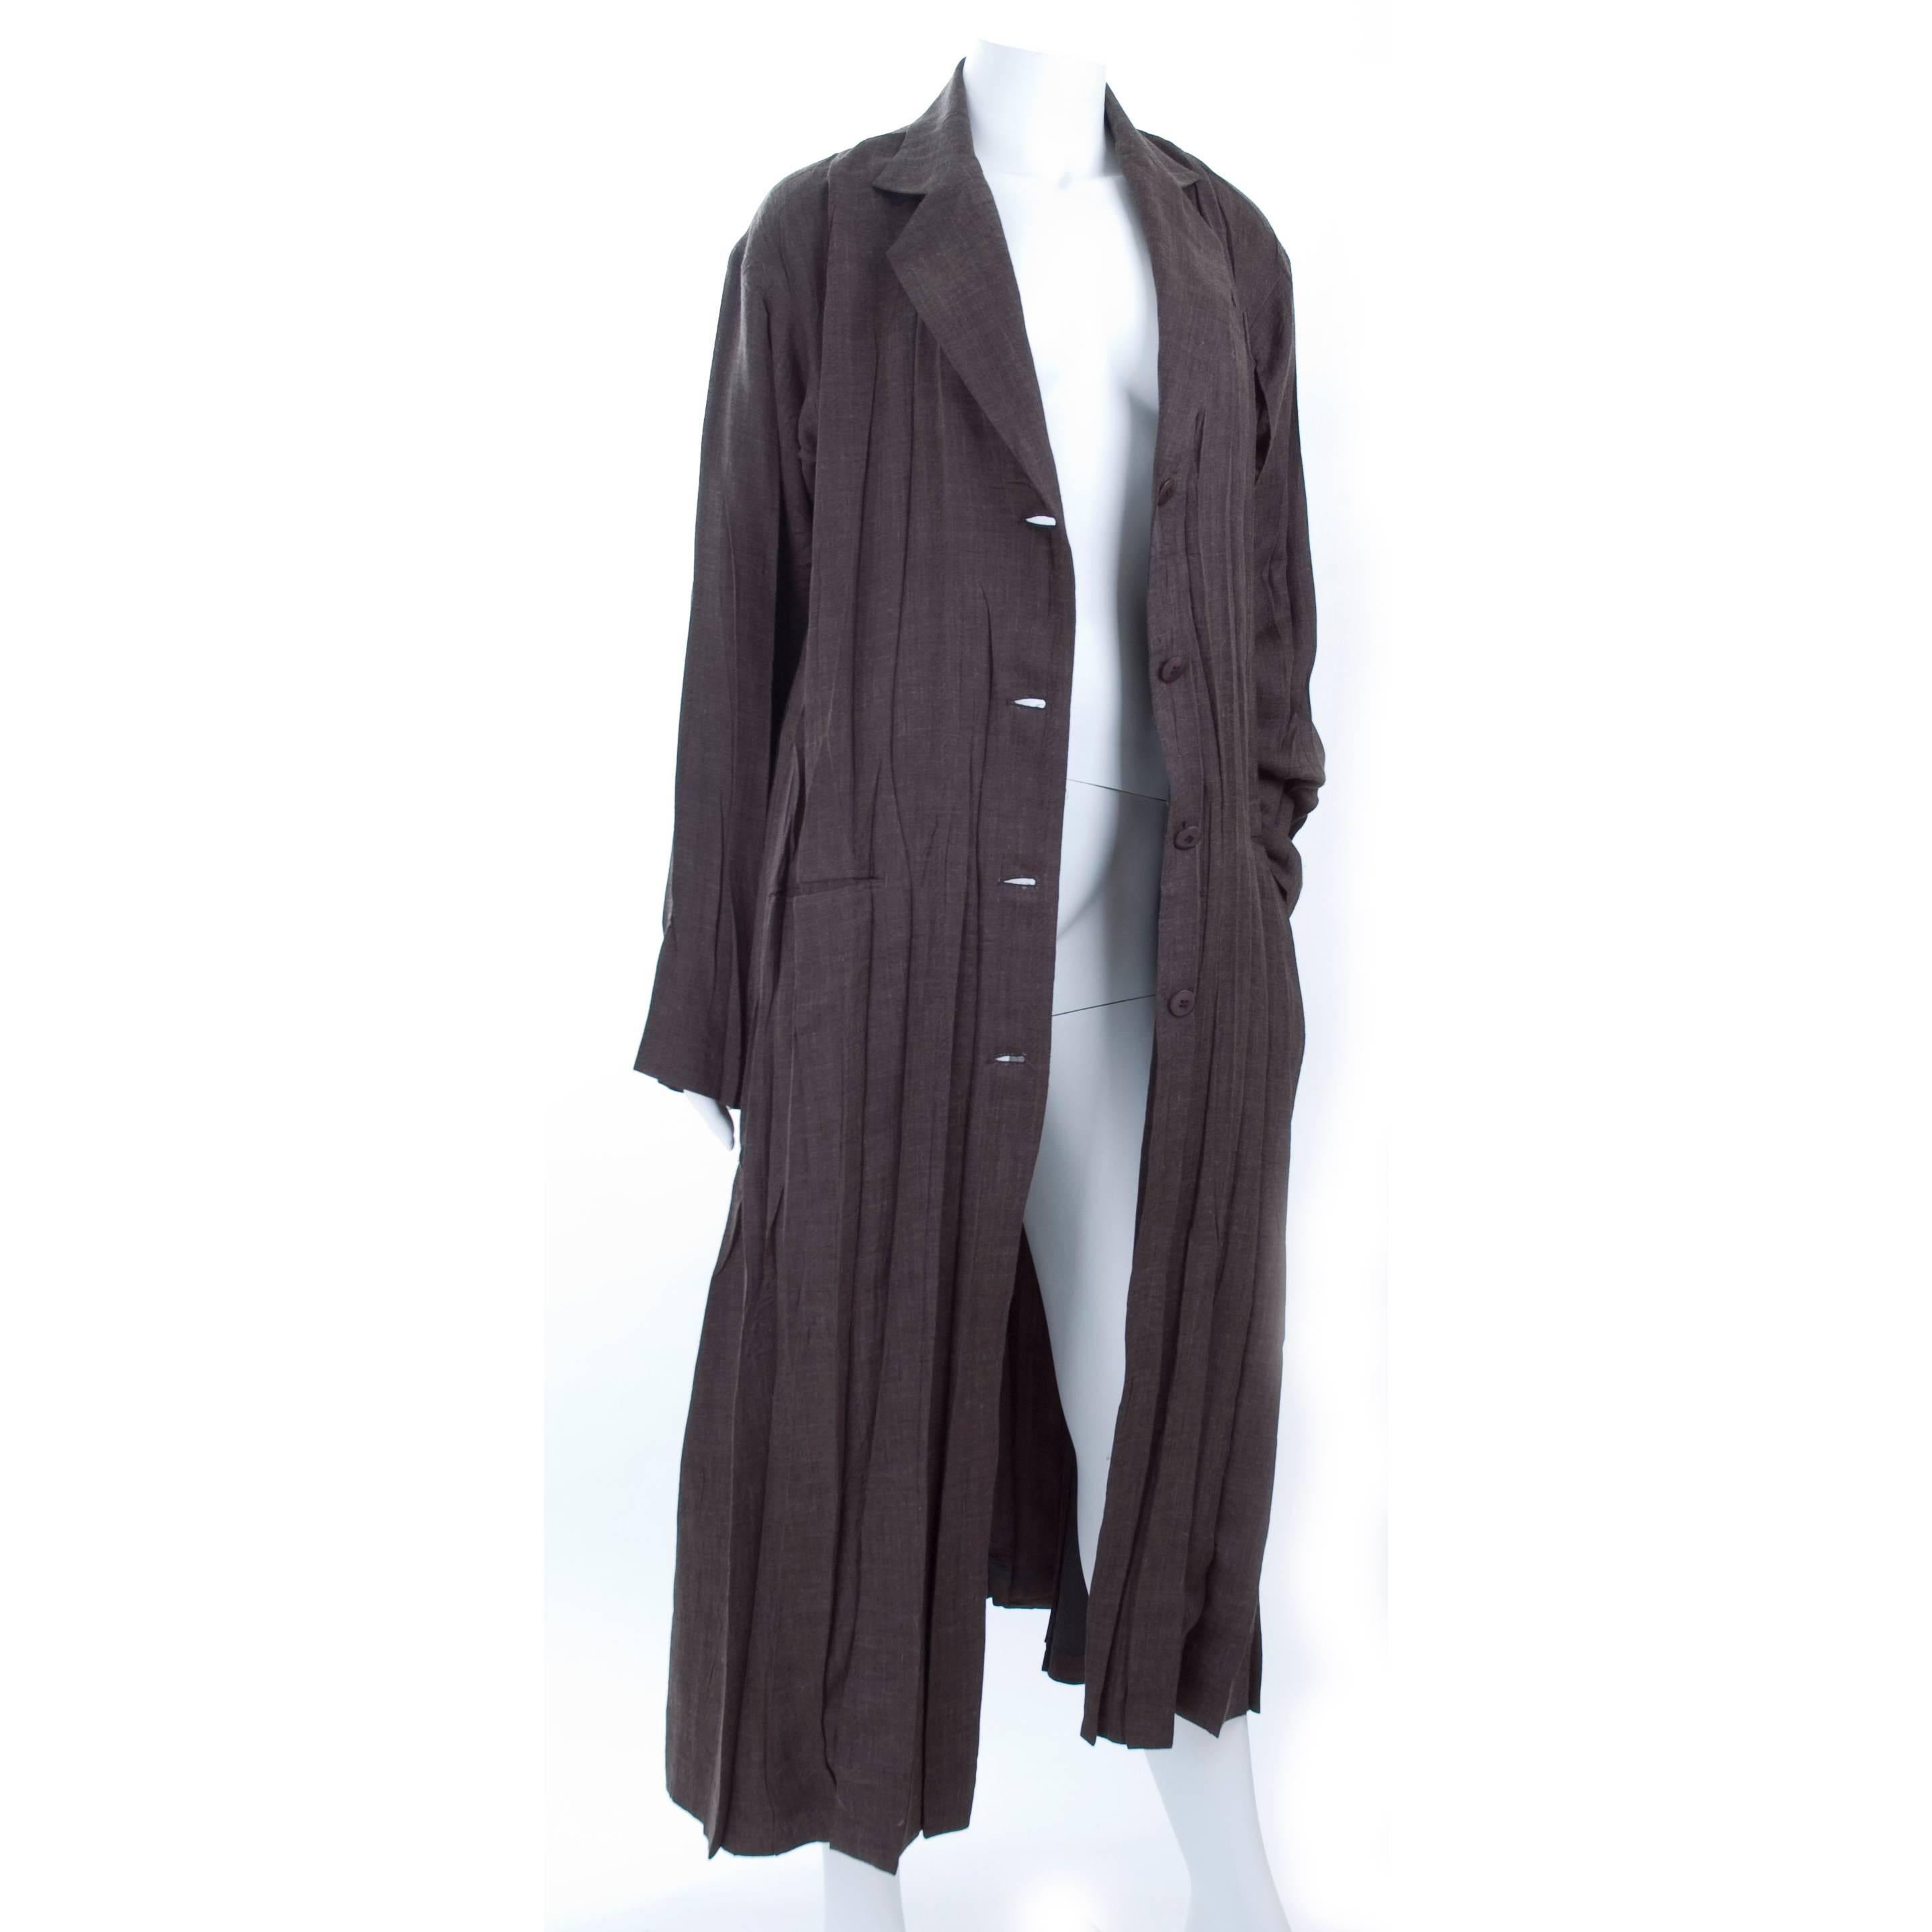 Vintage 1990's Issey Miyake pleated coat in charcoal, lightweight and fully lined.
Size 3
100% Polyester
Execellent condition - no flaws to mention
Measurements:
Length 50 - bust 42 inches